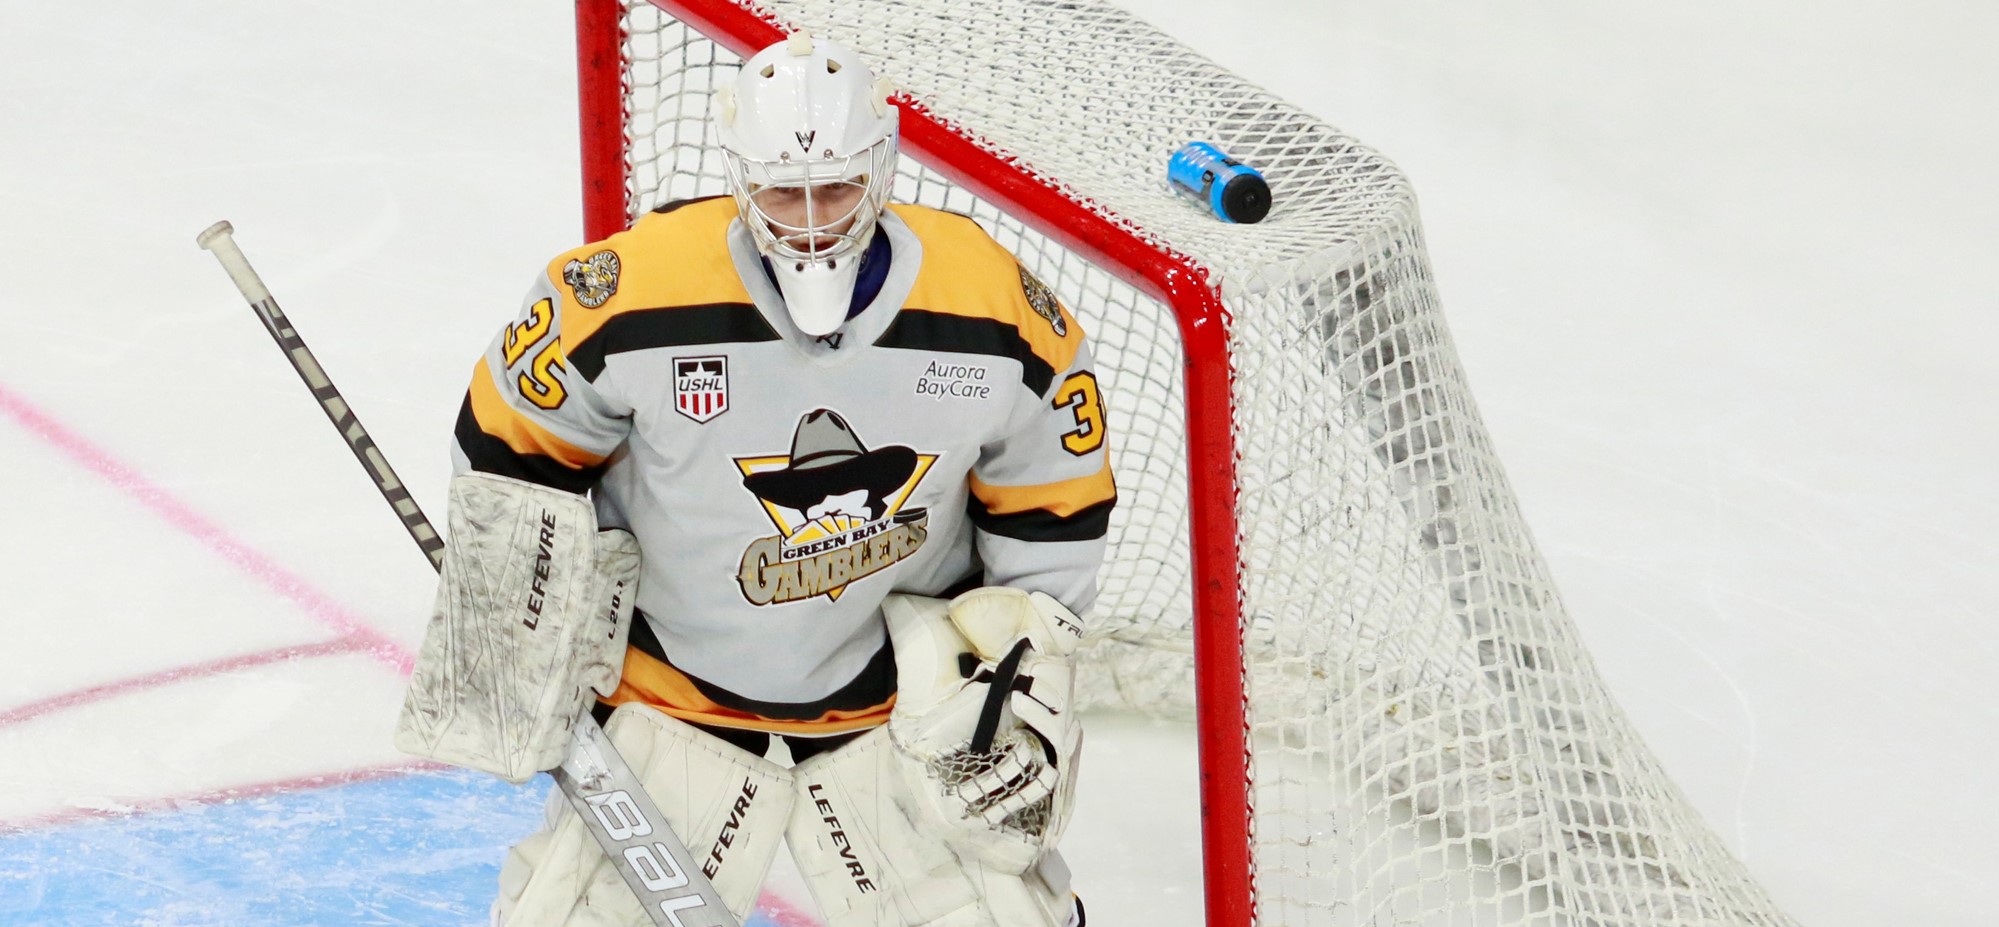 Buckley thrust into emergency goalie situation for Gamblers